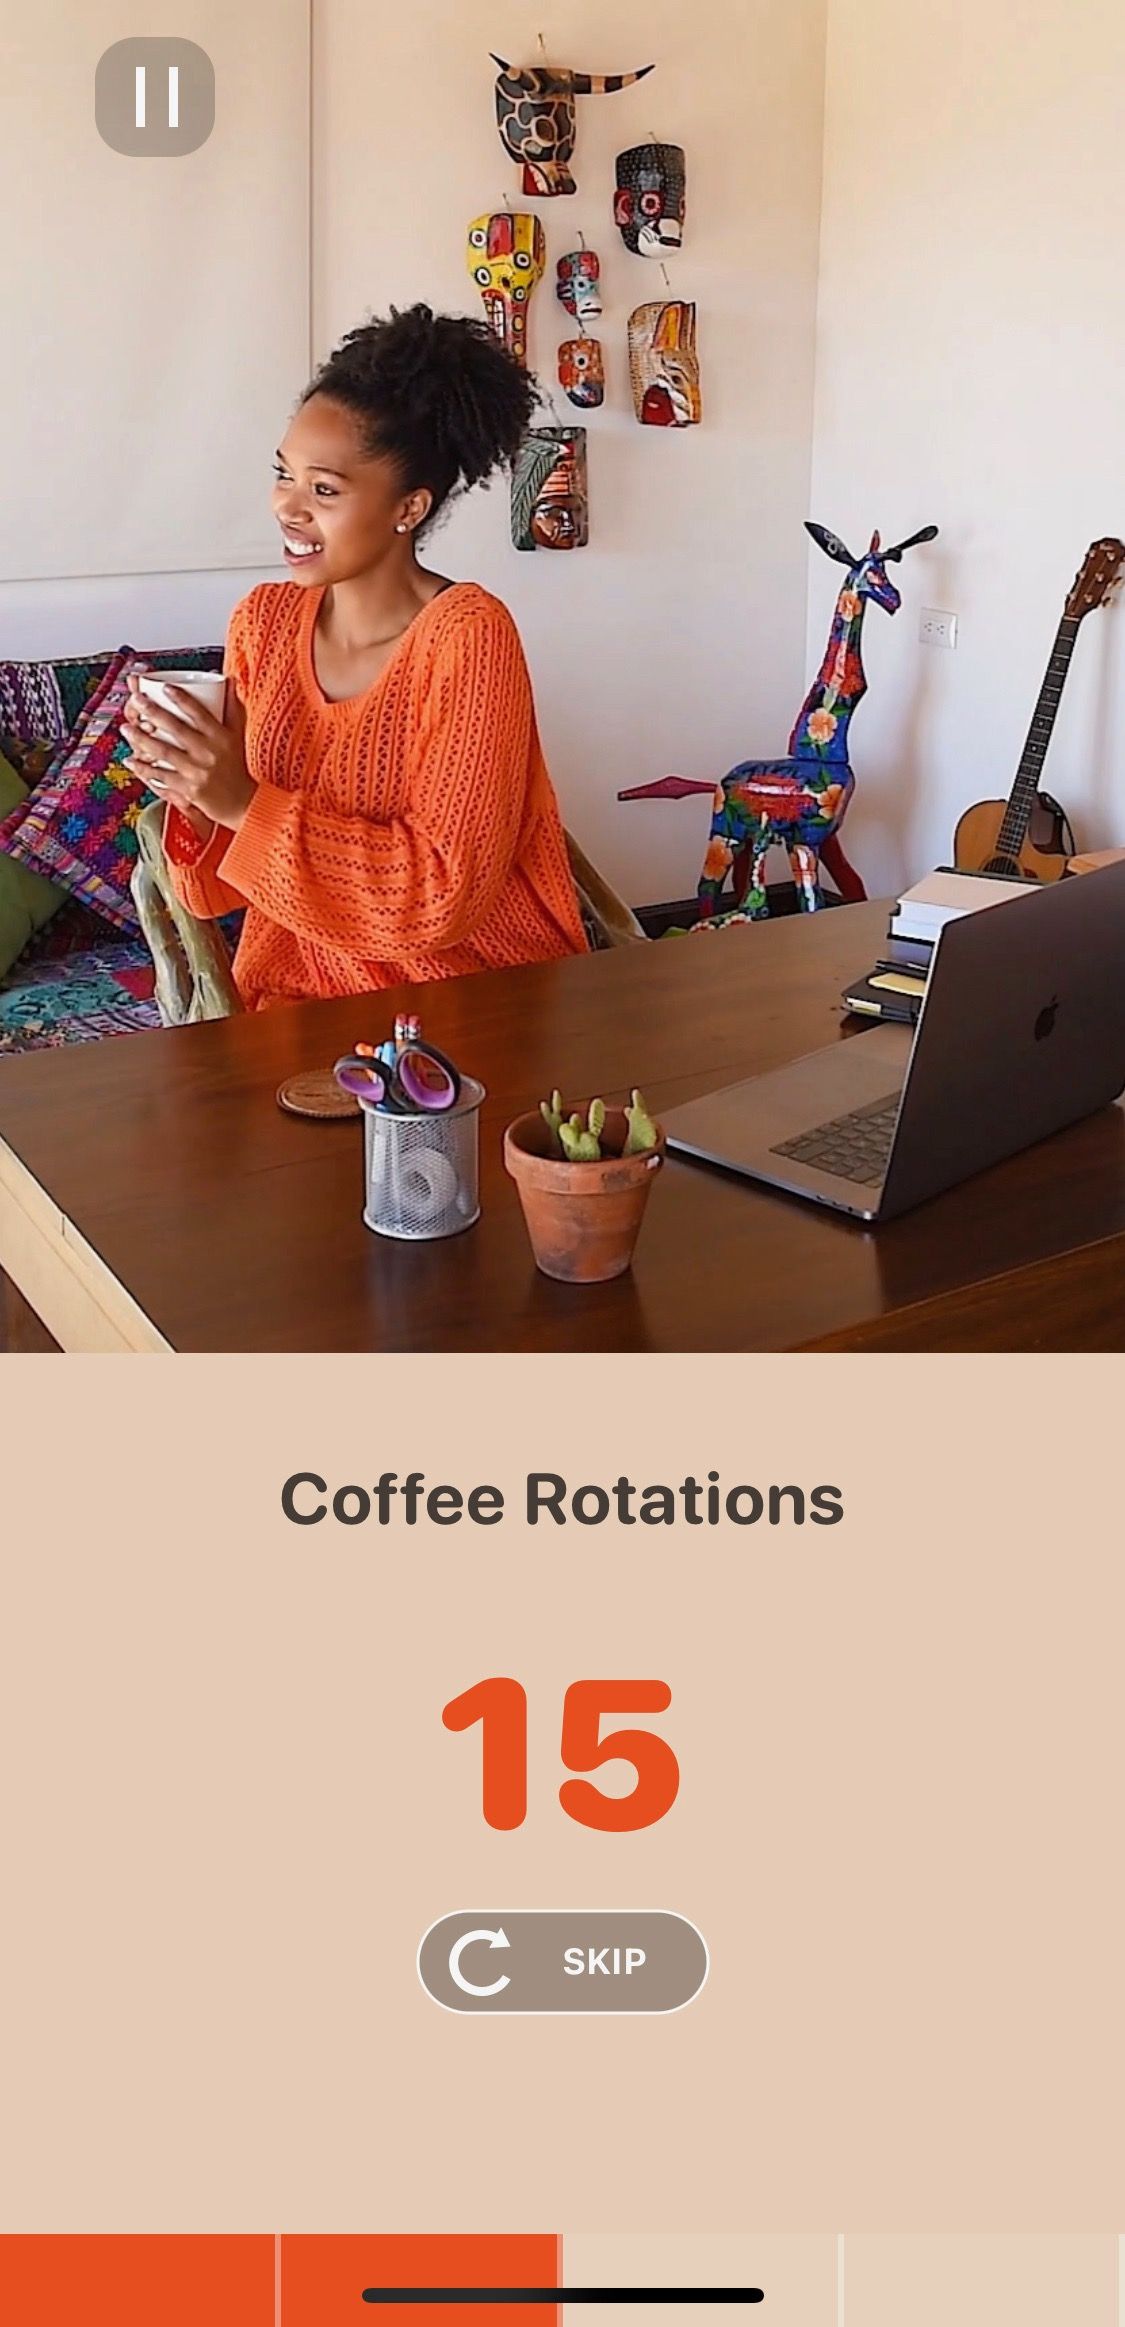 Screenshot of Wakeout app showing the coffee rotations exercise screen 2